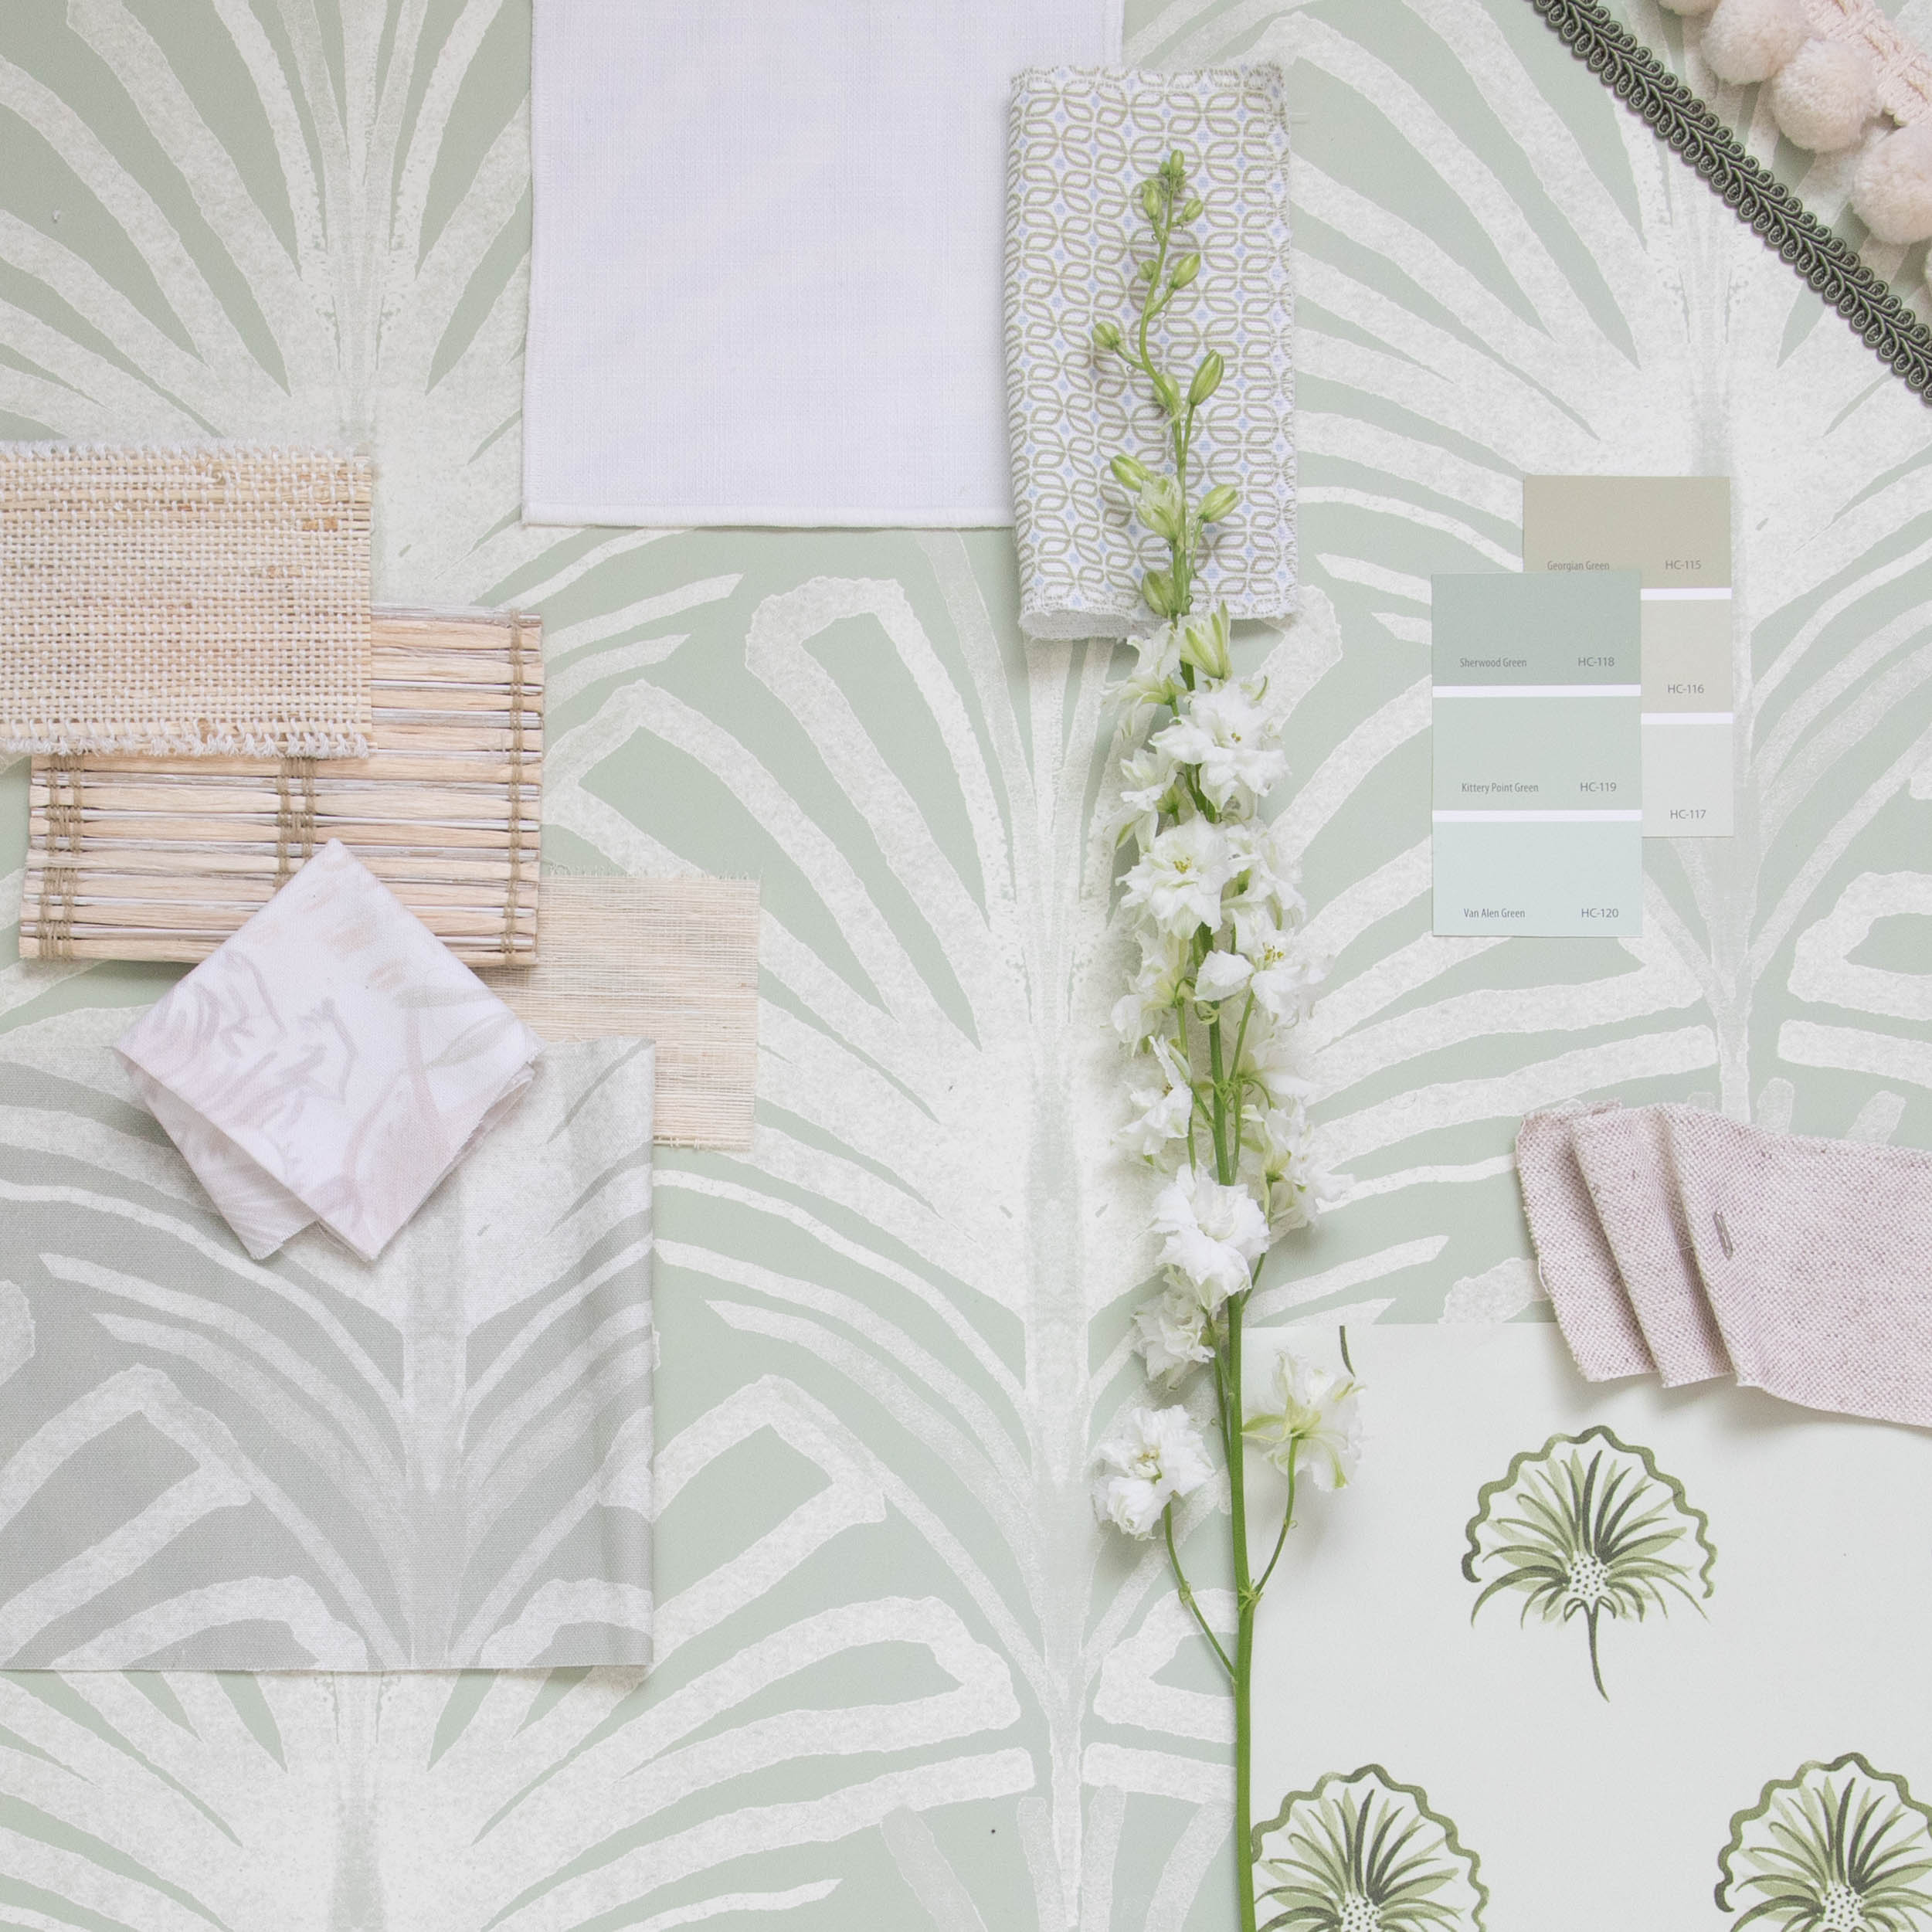 Interior design moodboard and fabric inspirations with Sage Green Palm Printed Swatch, Green Floral Printed Swatch, and Light Brown Swatch